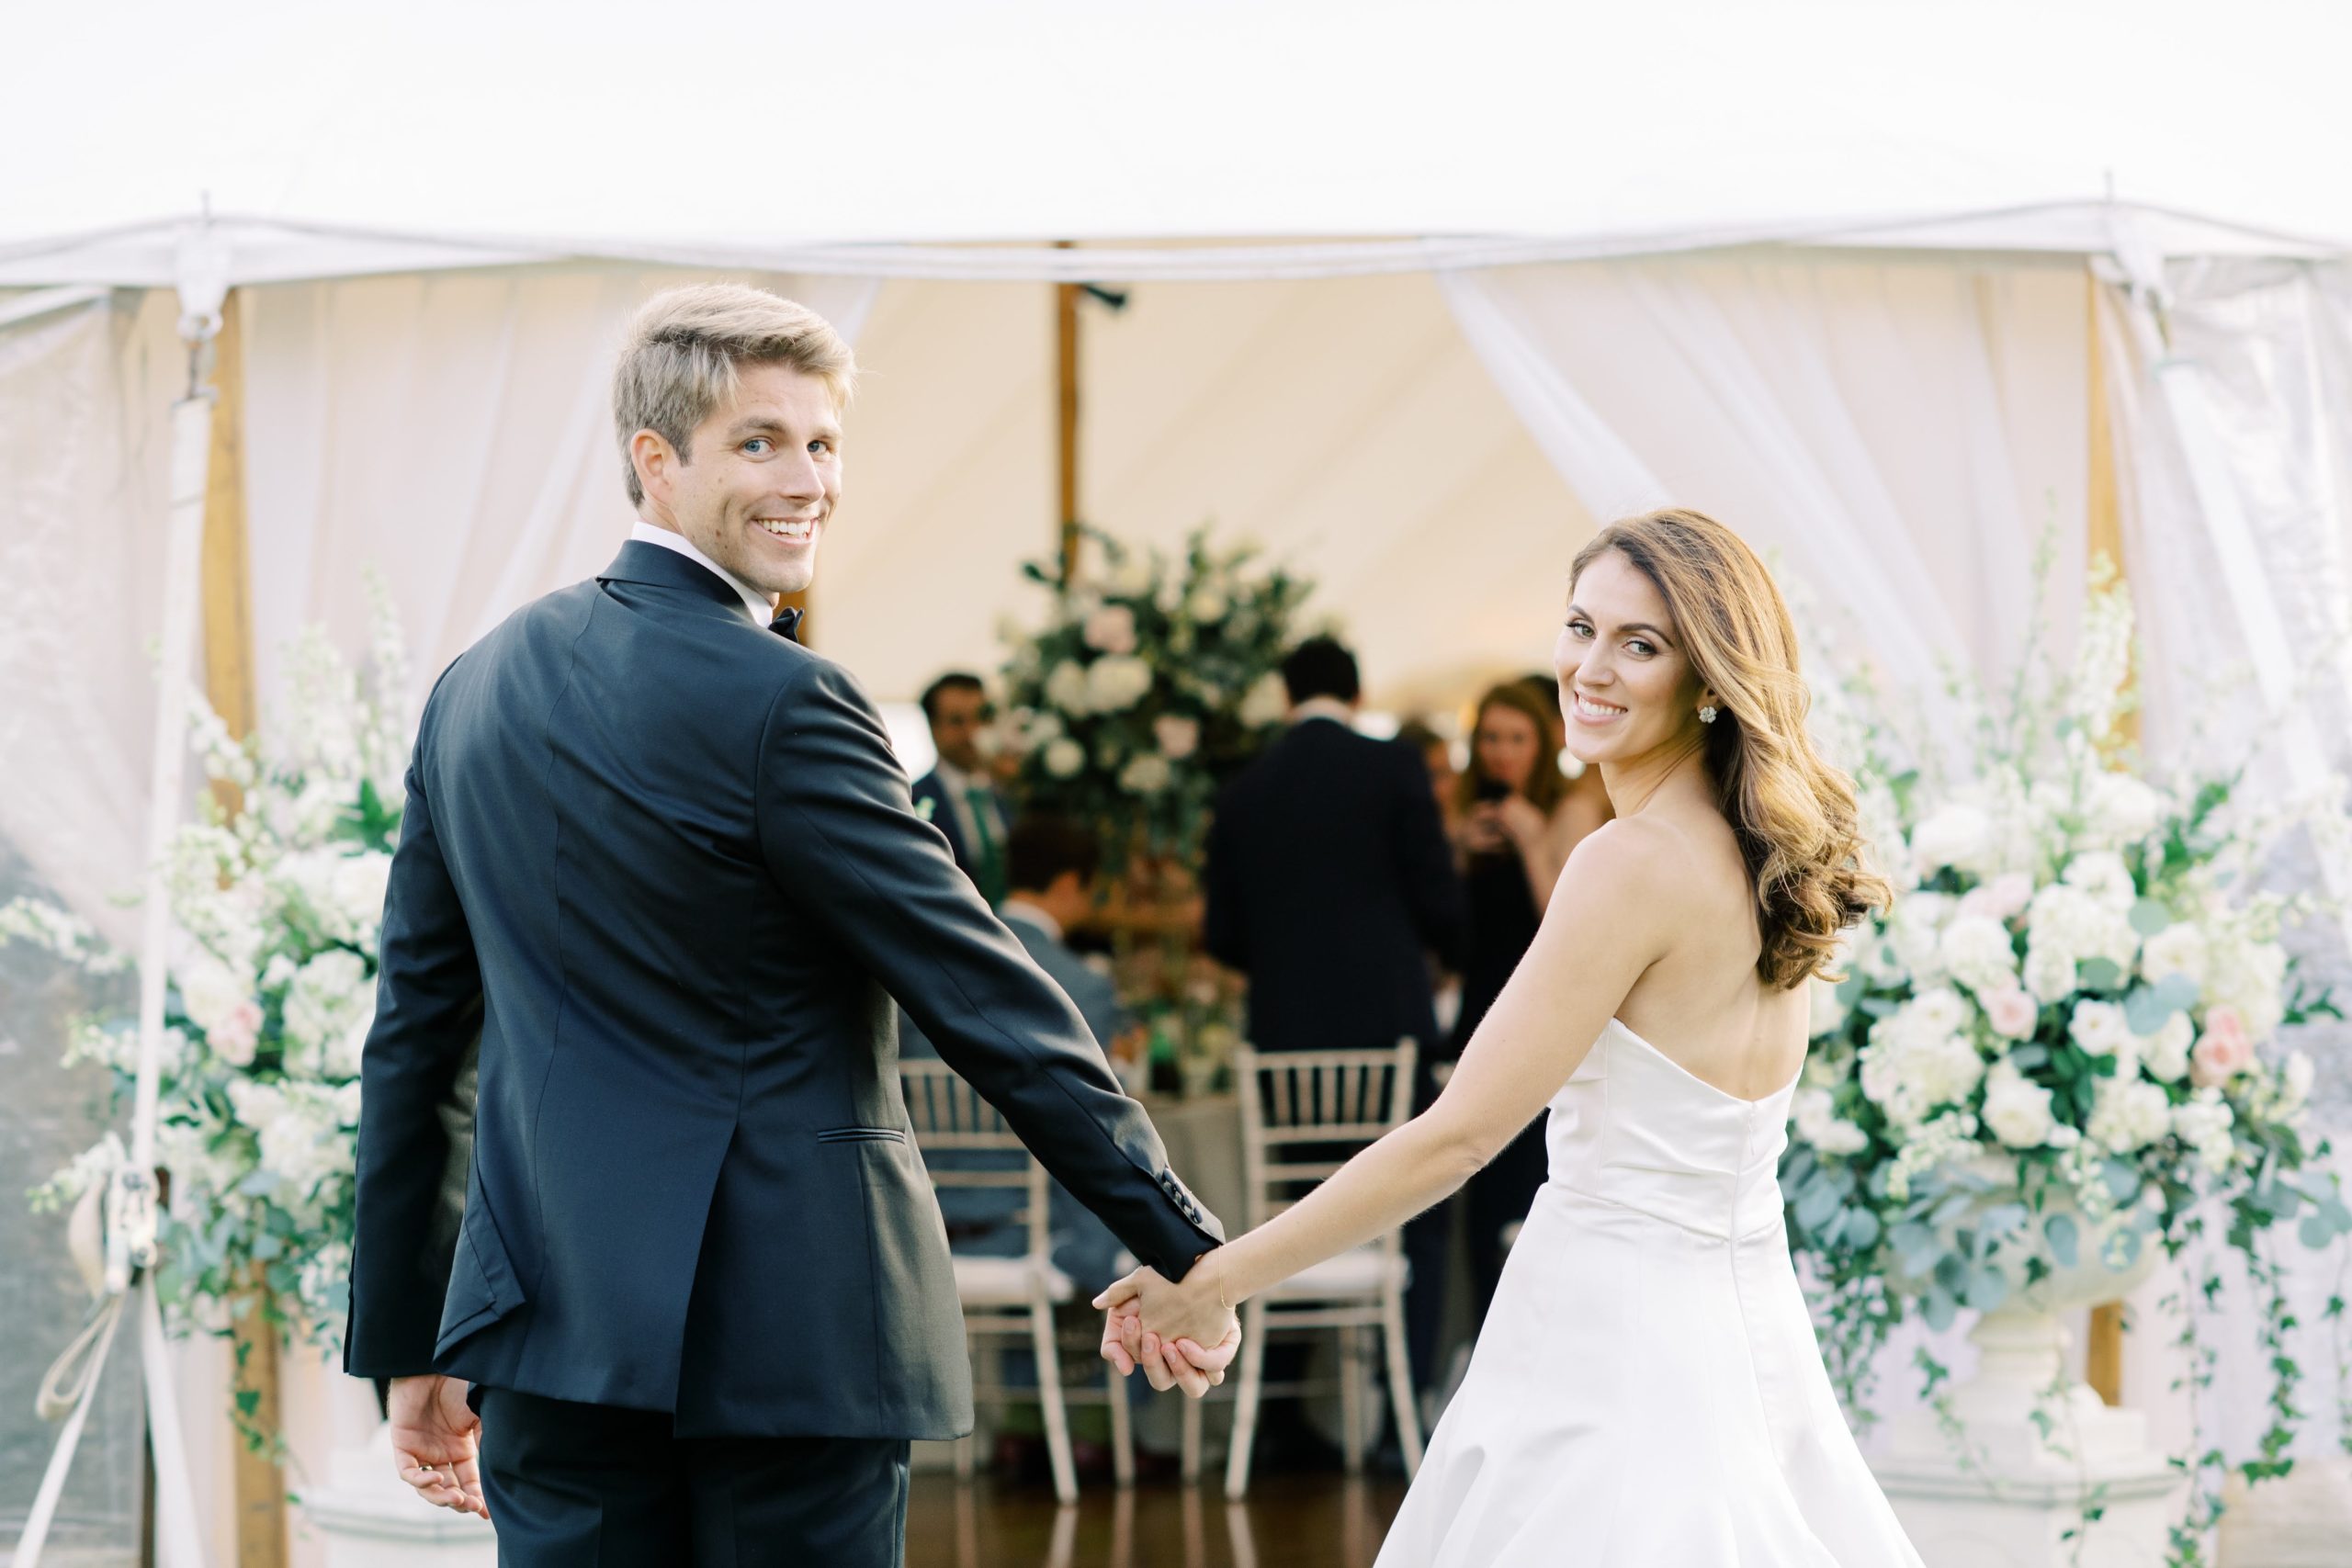 Classic Timeless Garden Party Cape May Congress Hall Wedding. Bride and groom entering Sailcloth tent for lawn reception. entrance flanked by lush overflowing garden urns. Event design by Sebesta design, photography by Rachel Pearlman Photography